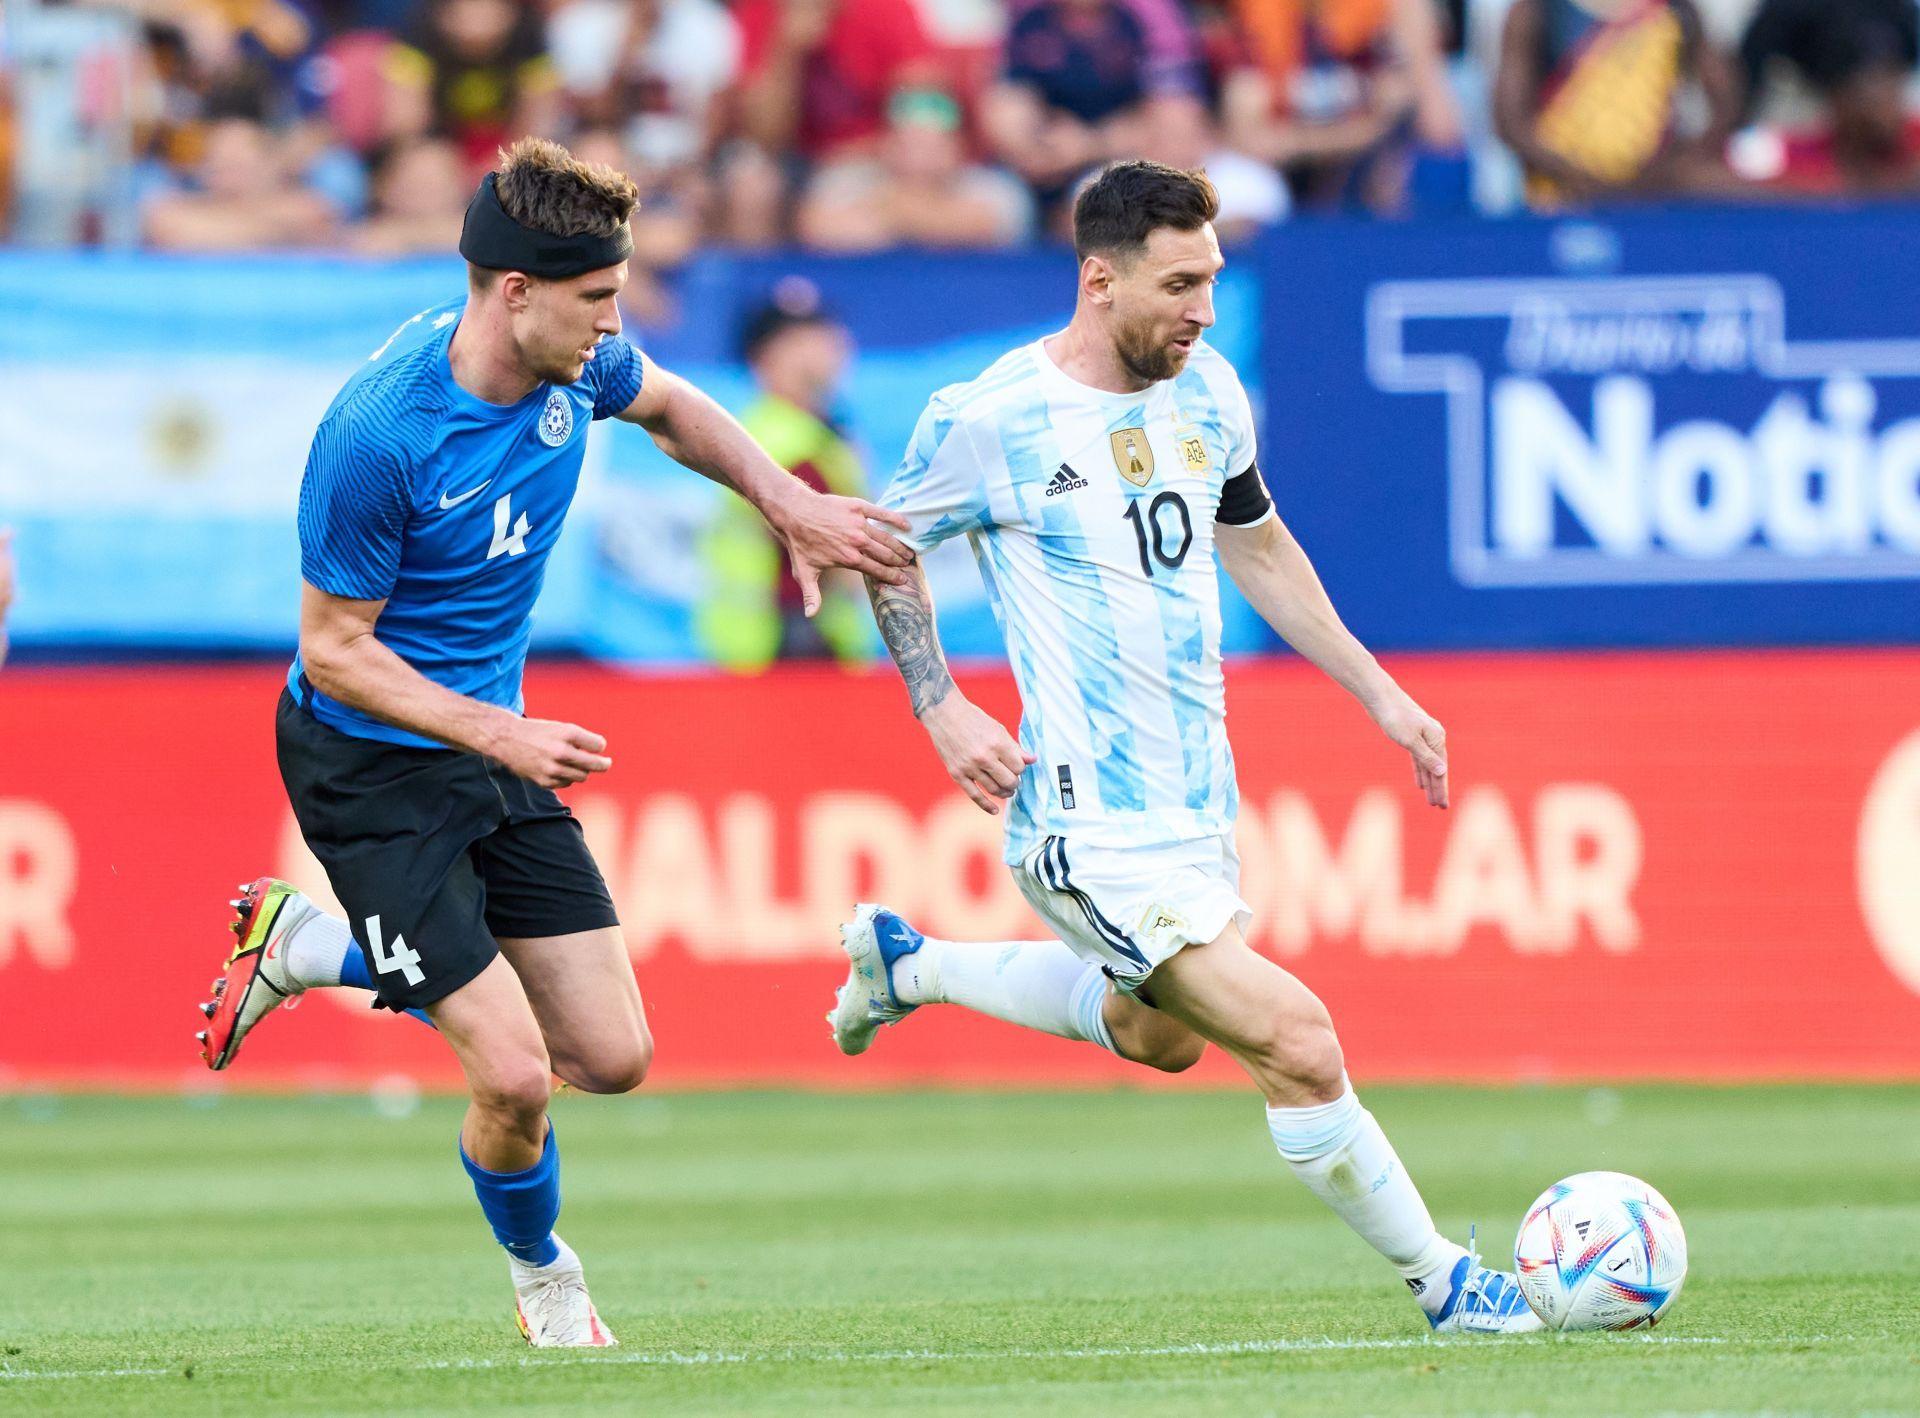 All eyes will be on Lionel Messi at the 2022 FIFA World Cup